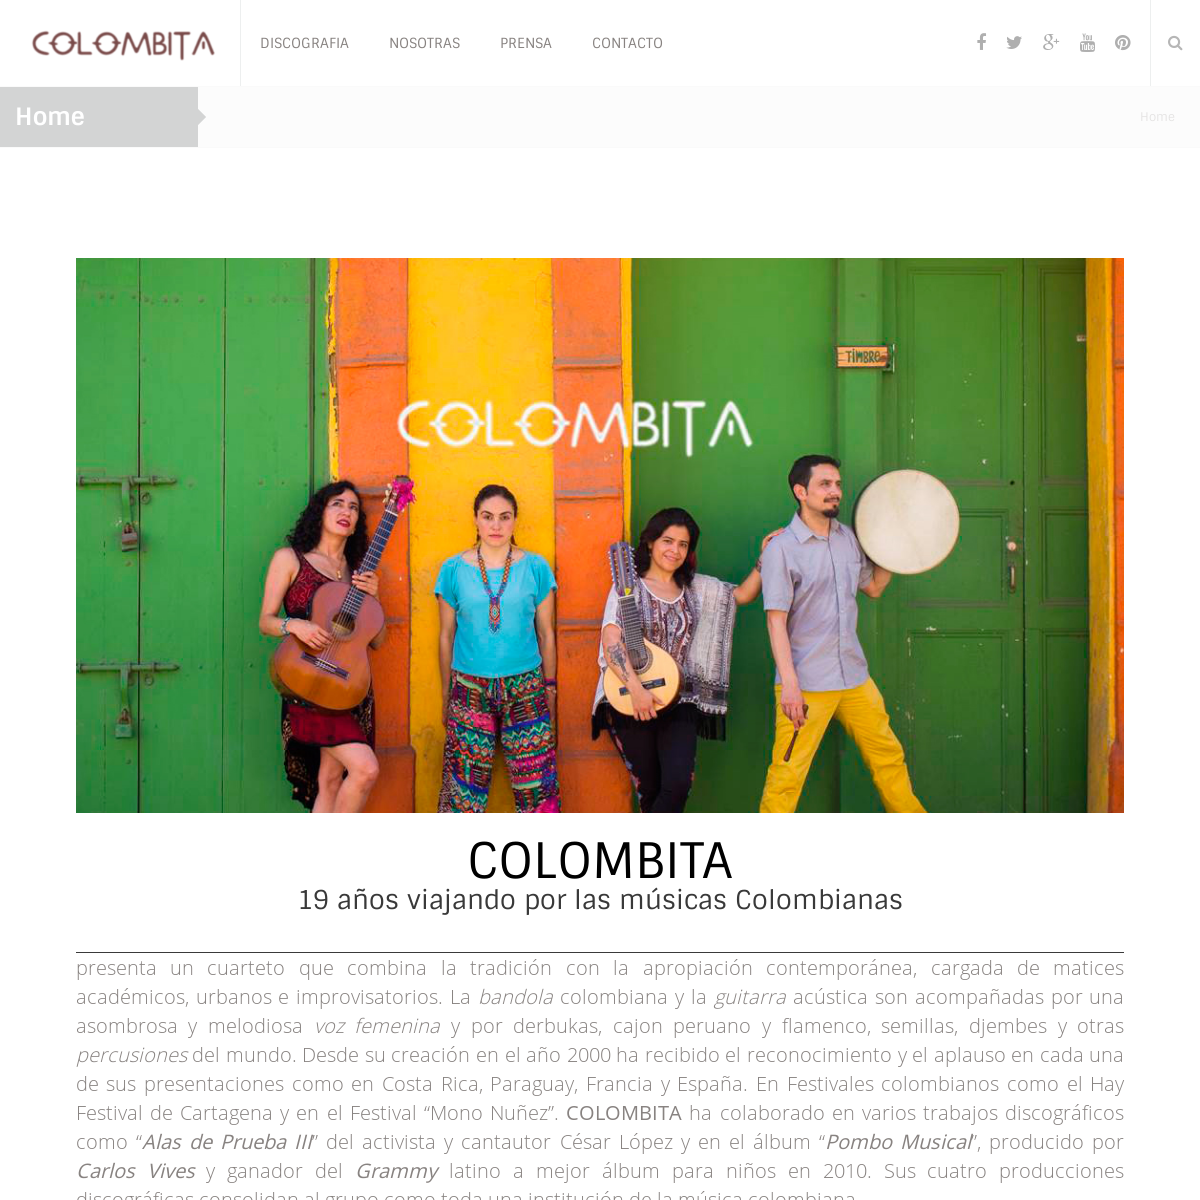 A complete backup of colombita.com